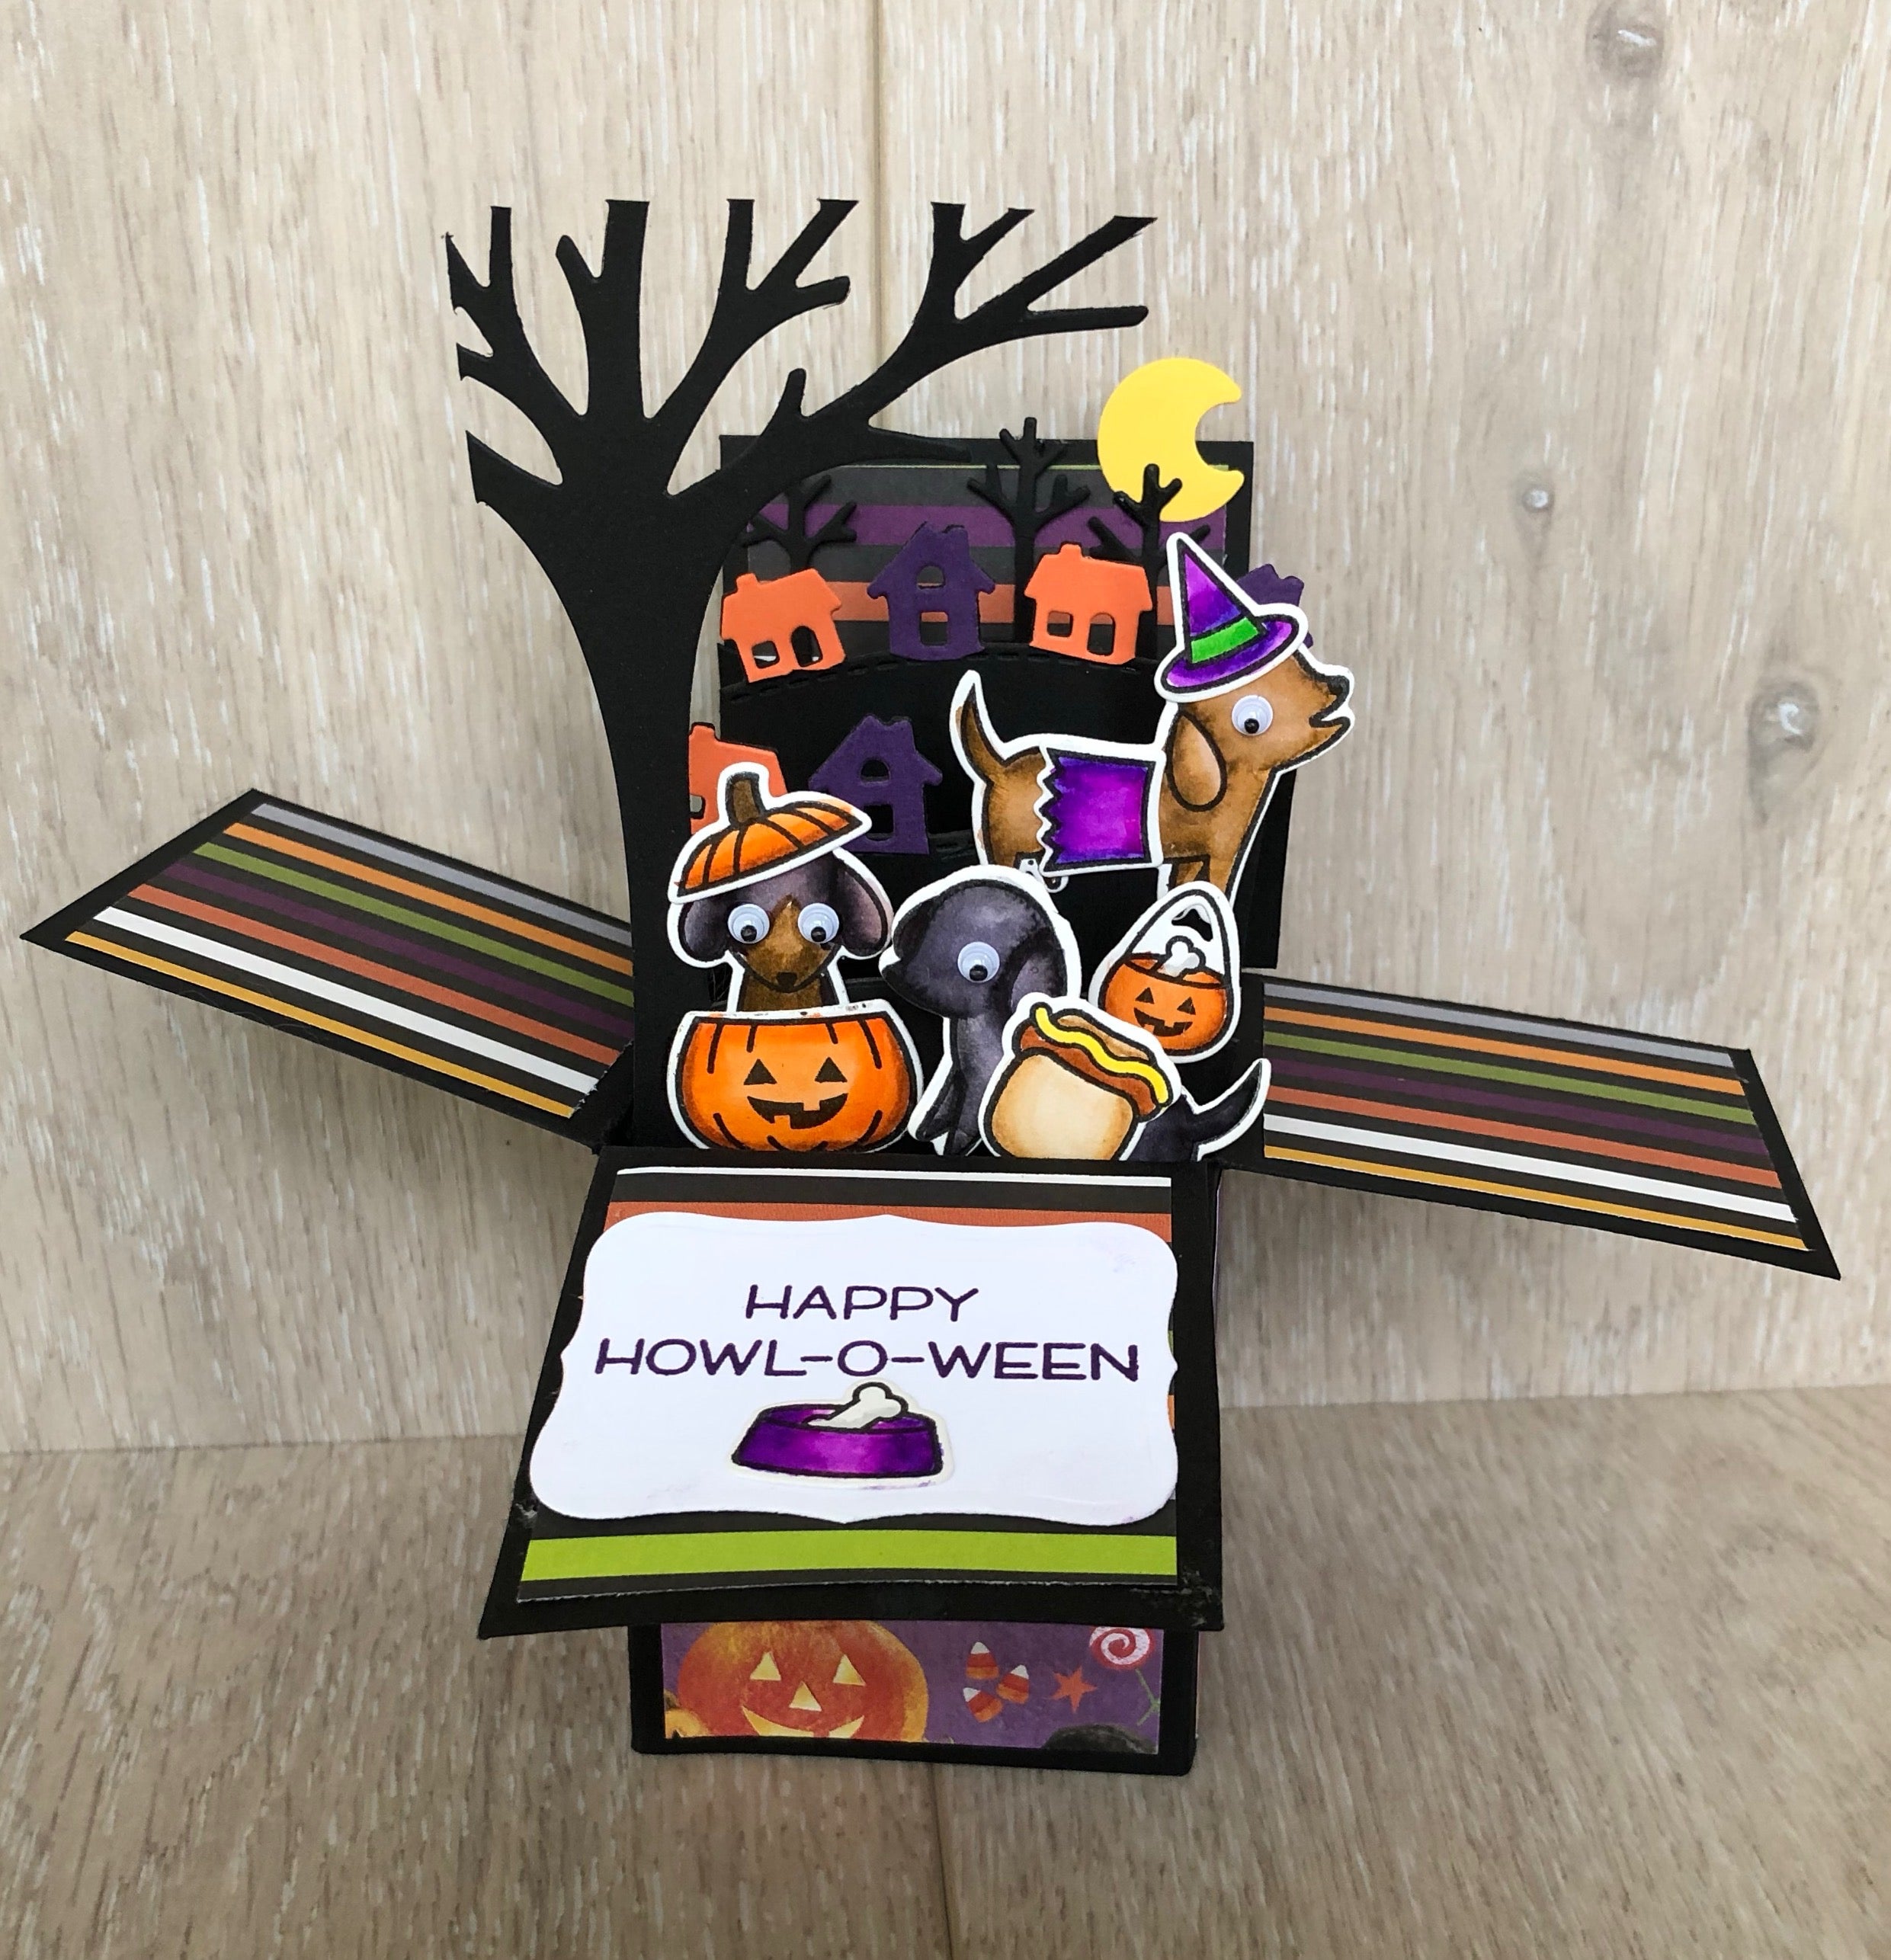 Lawn Fawn Howl-oween and Meowloween Cards